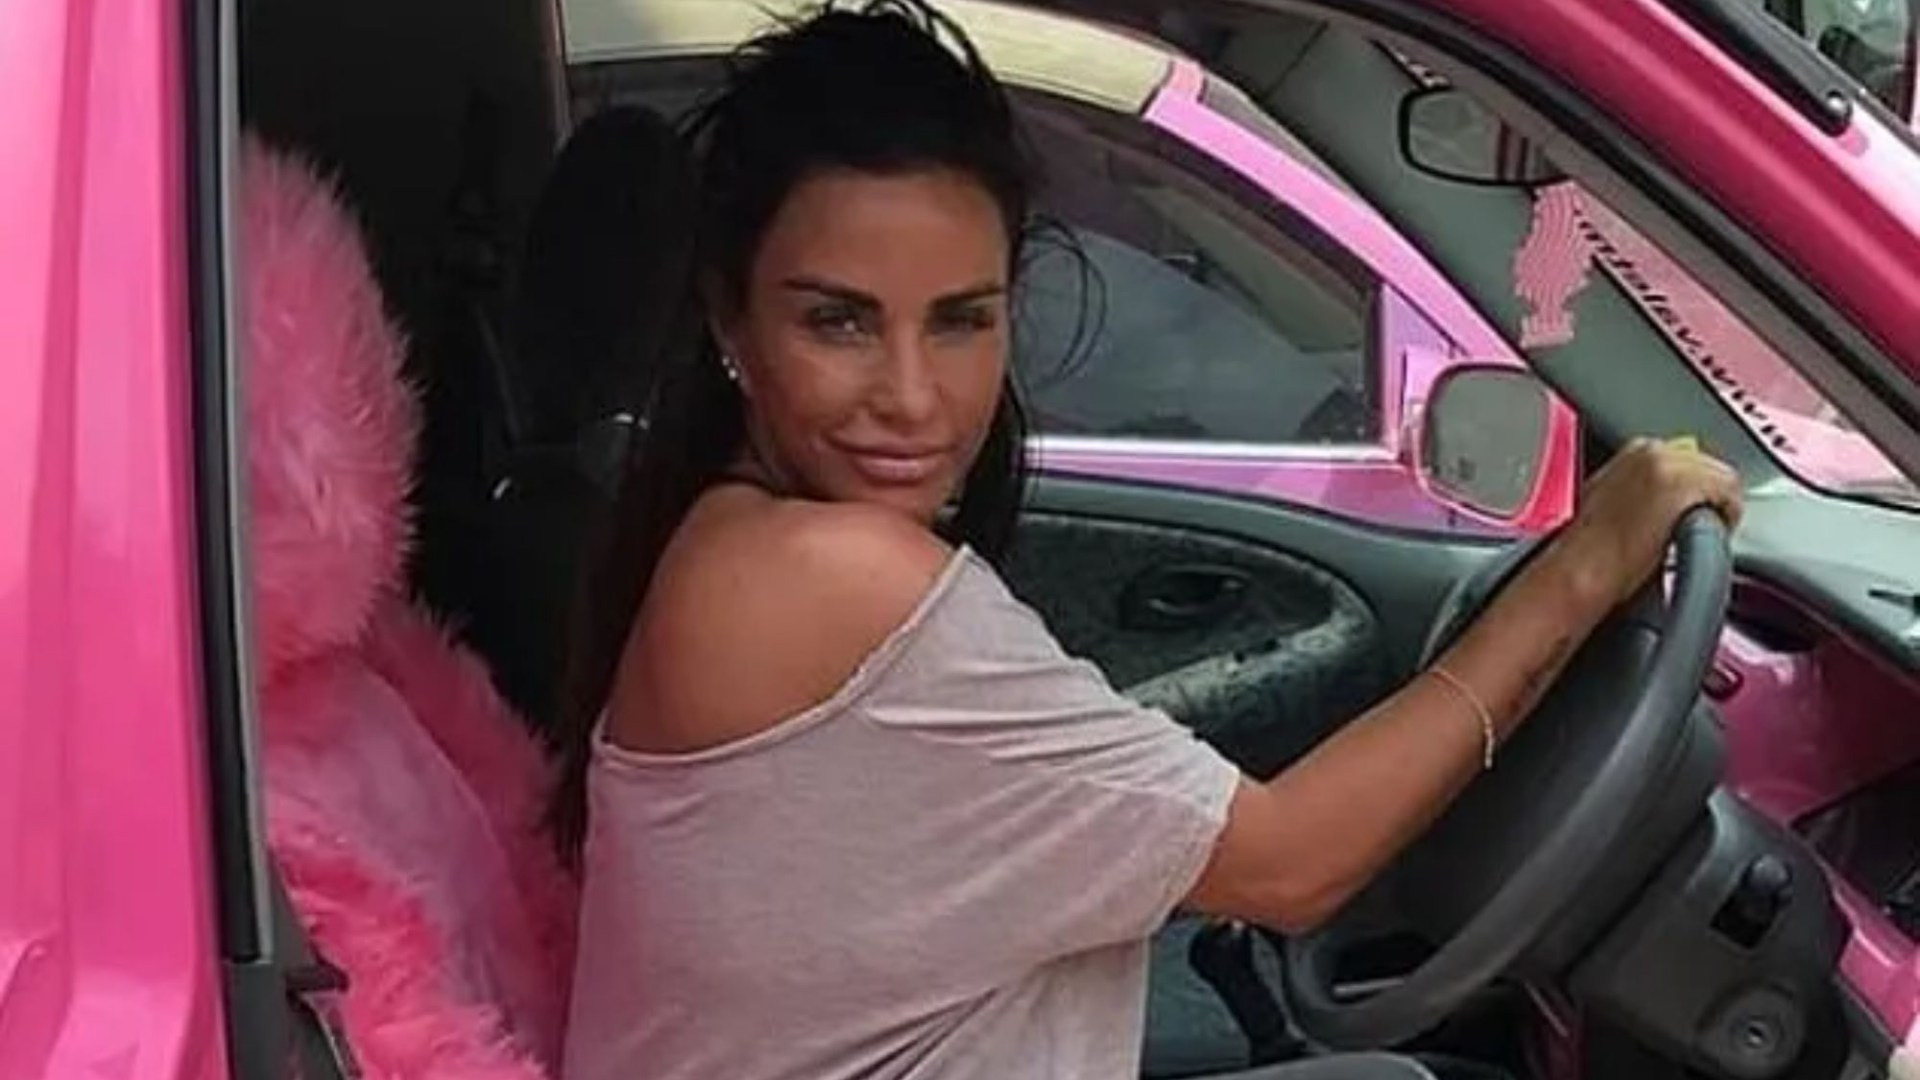 Katie Price #305 A free fake party for the grifting bint, why is